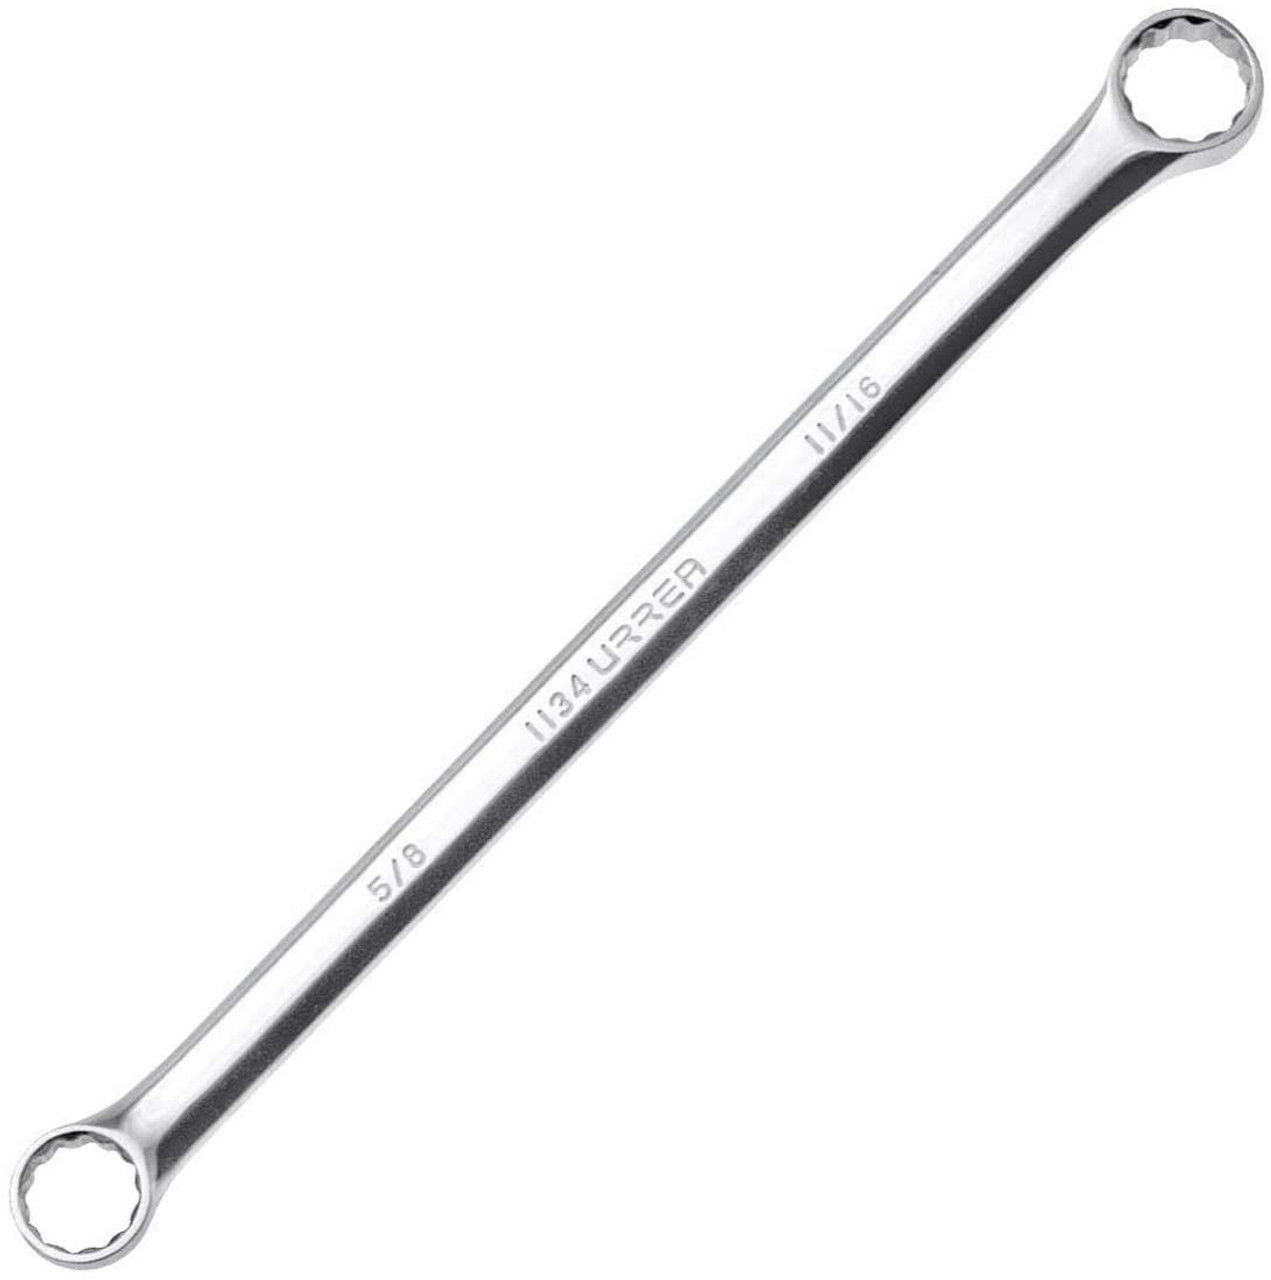 Full polished  15 Degree Box-End wrench, Size: 13/16x7/8,12 Point , Total Length: 13-7/8"